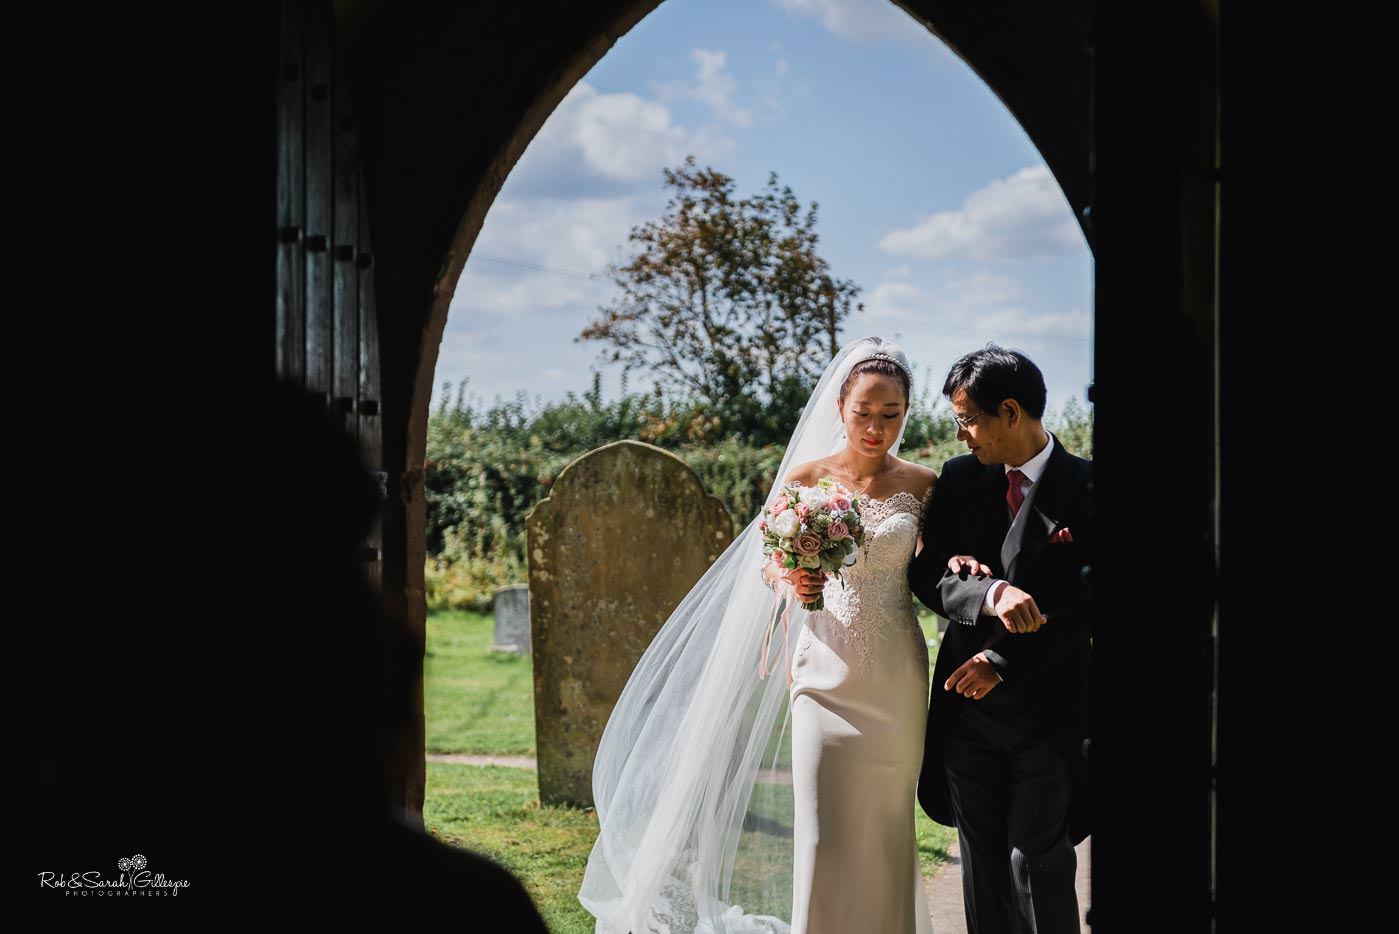 Wedding at St Peter's church Bourton-on-Dunsmore